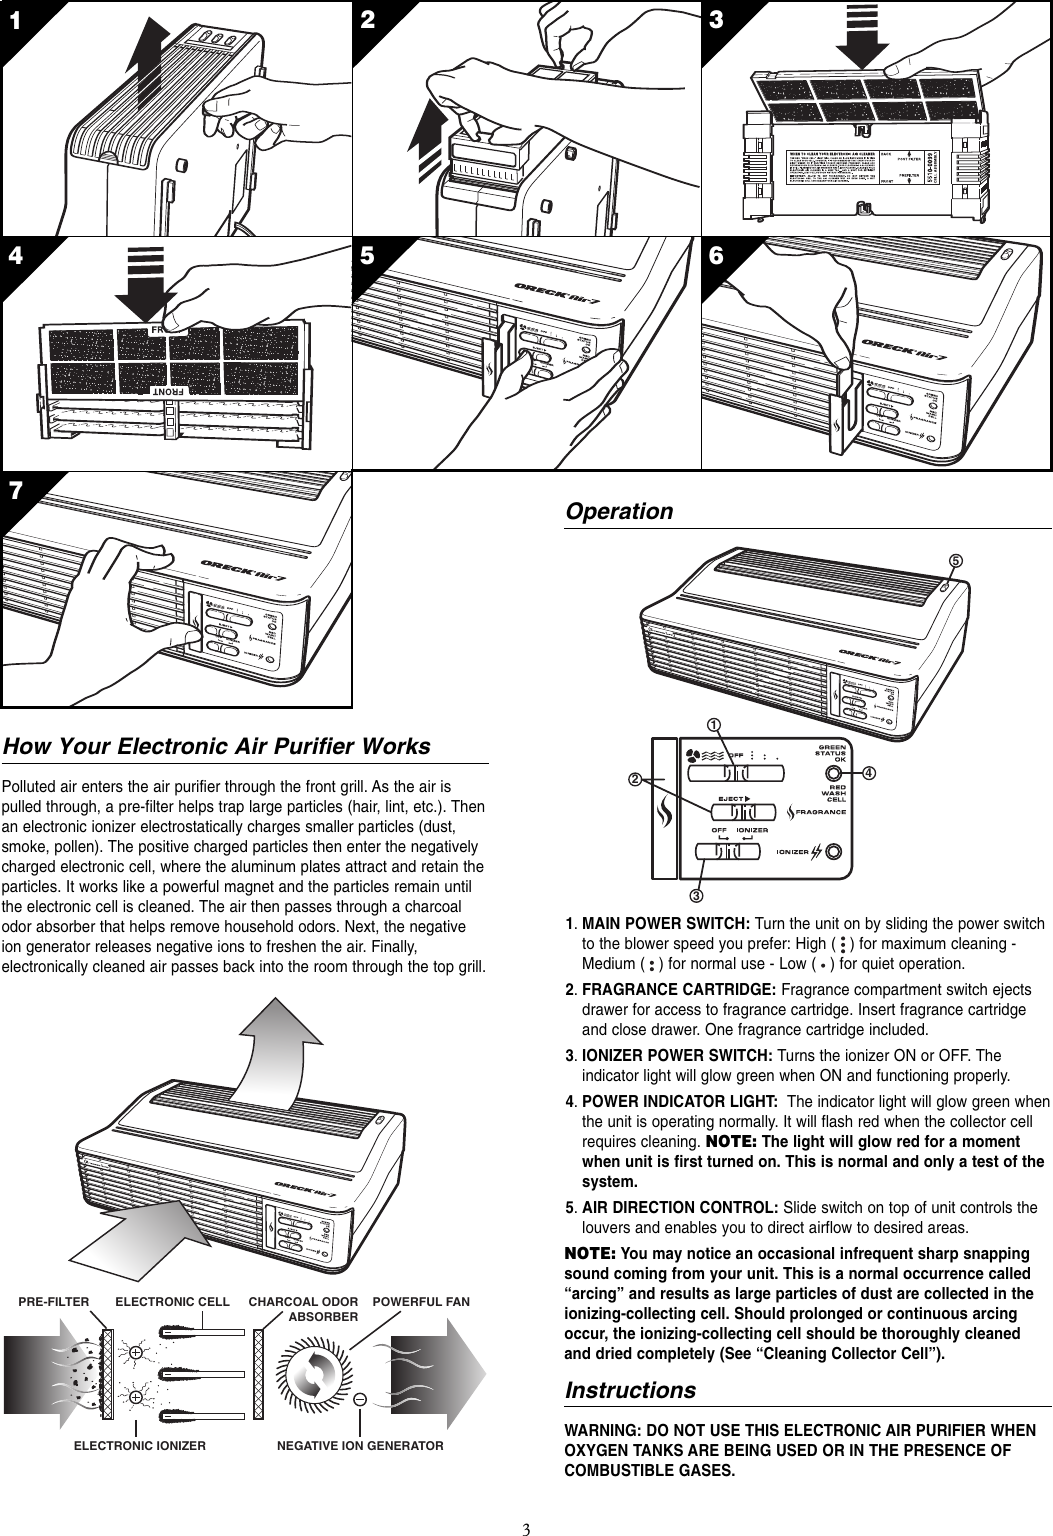 Page 3 of 4 - Oreck Oreck-Air7-Users-Manual- Air 7 Manual REV H  Oreck-air7-users-manual